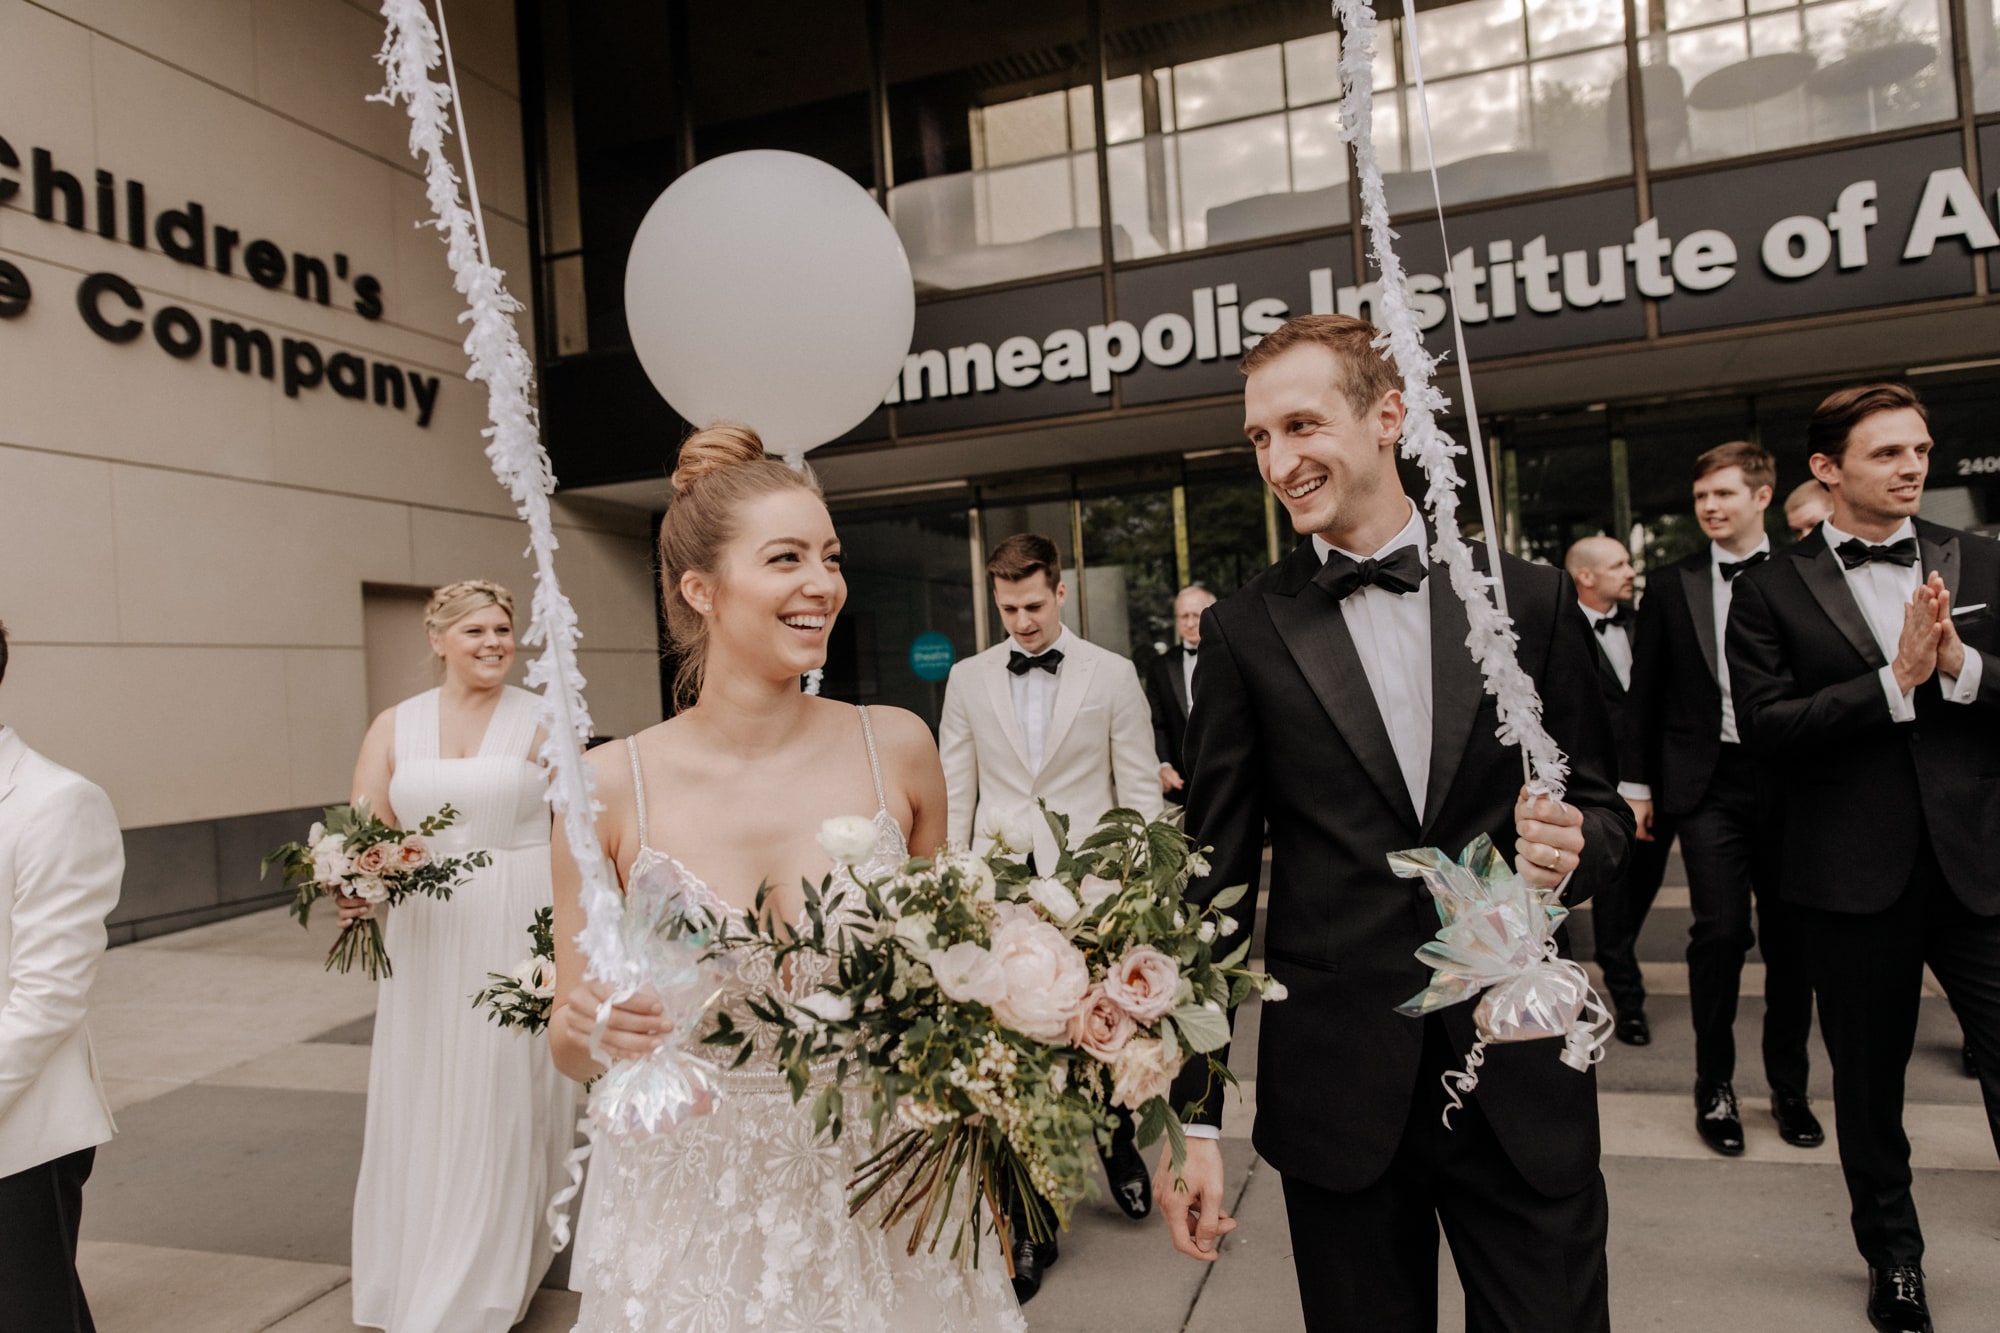 A happy bride and groom smile while walking outside of the Minneapolis Institute of Art.